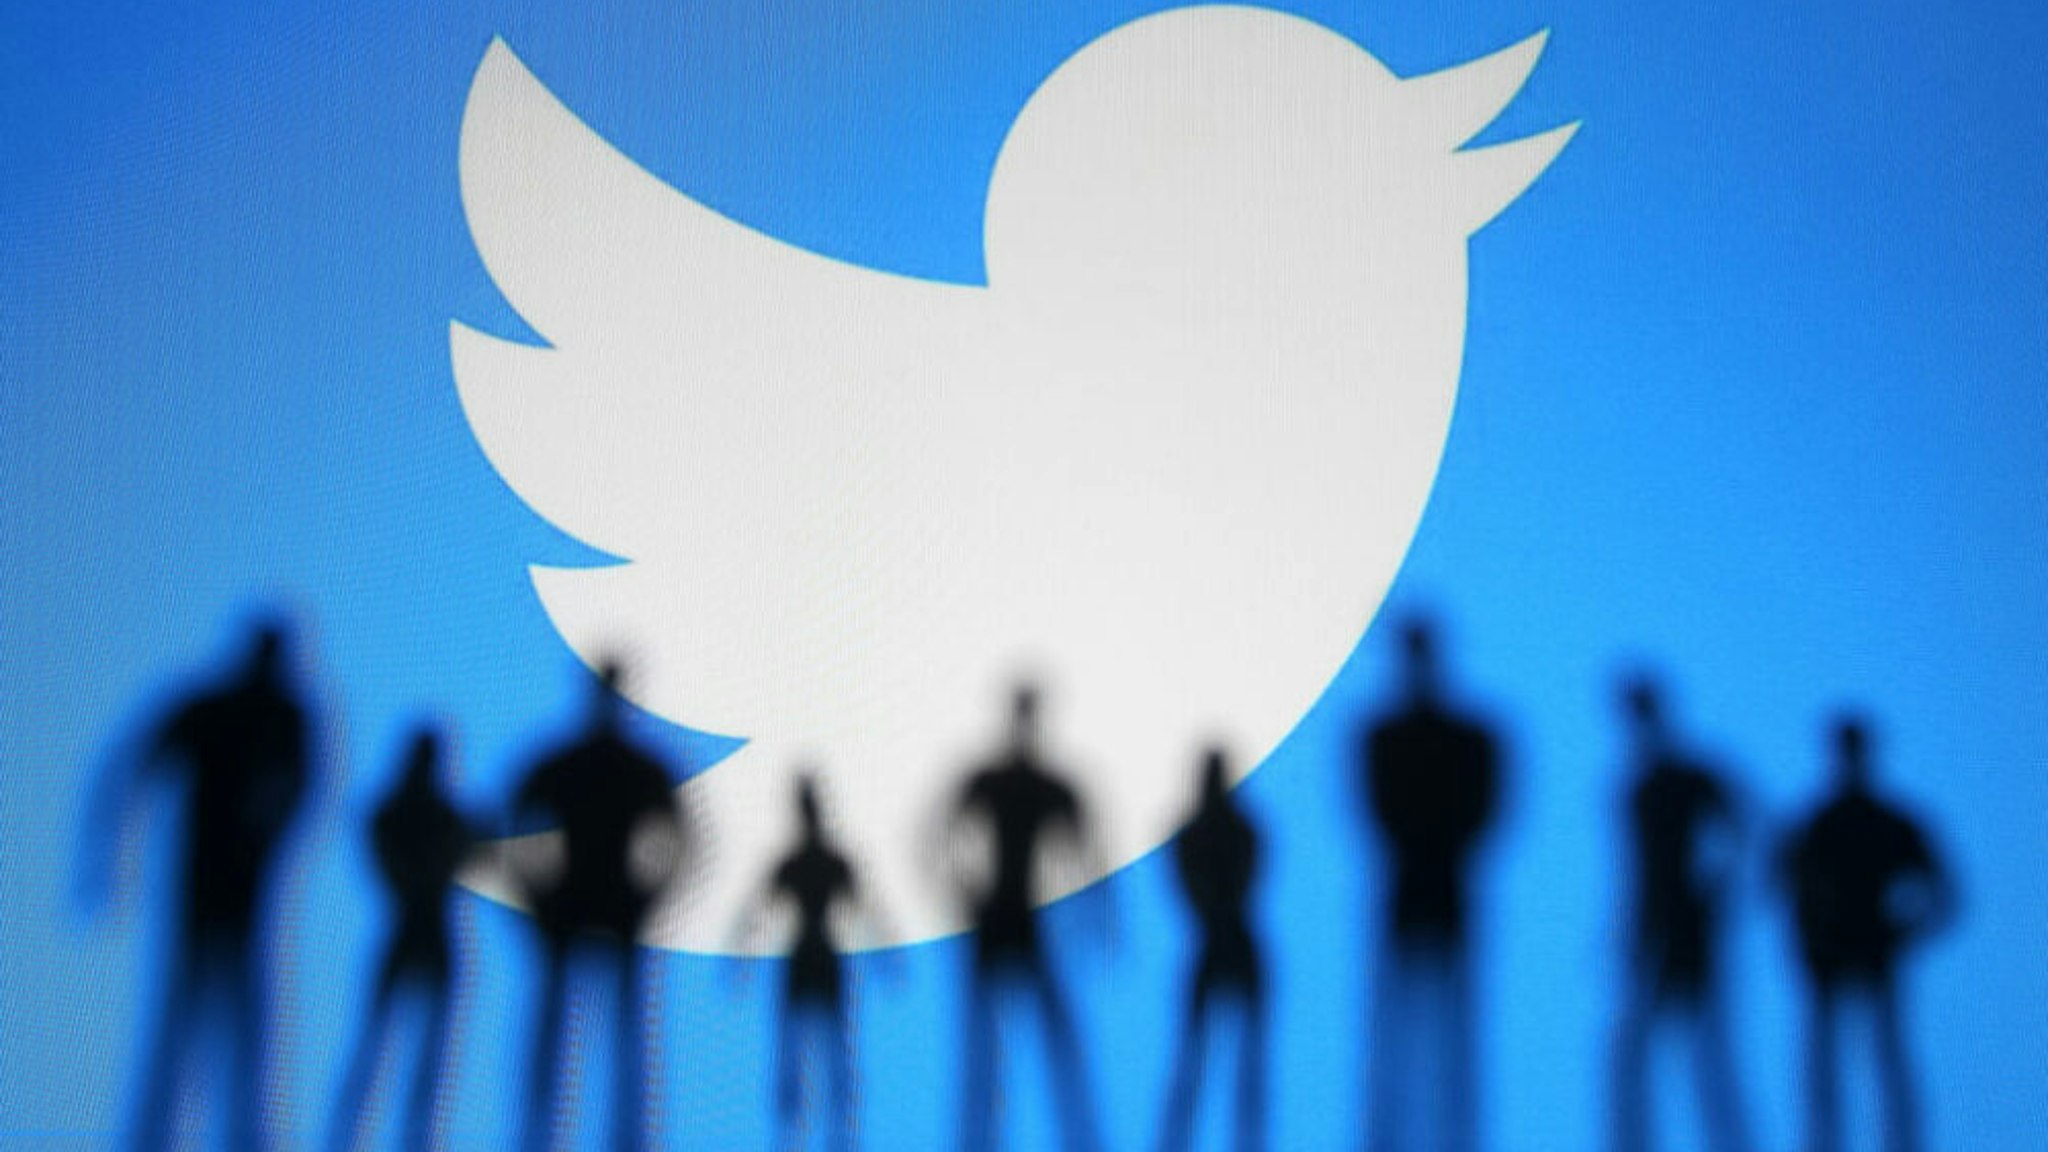 UKRAINE - 2021/01/11: In this photo illustration a Twitter logo is seen displayed in front of the silhouettes of toy people.